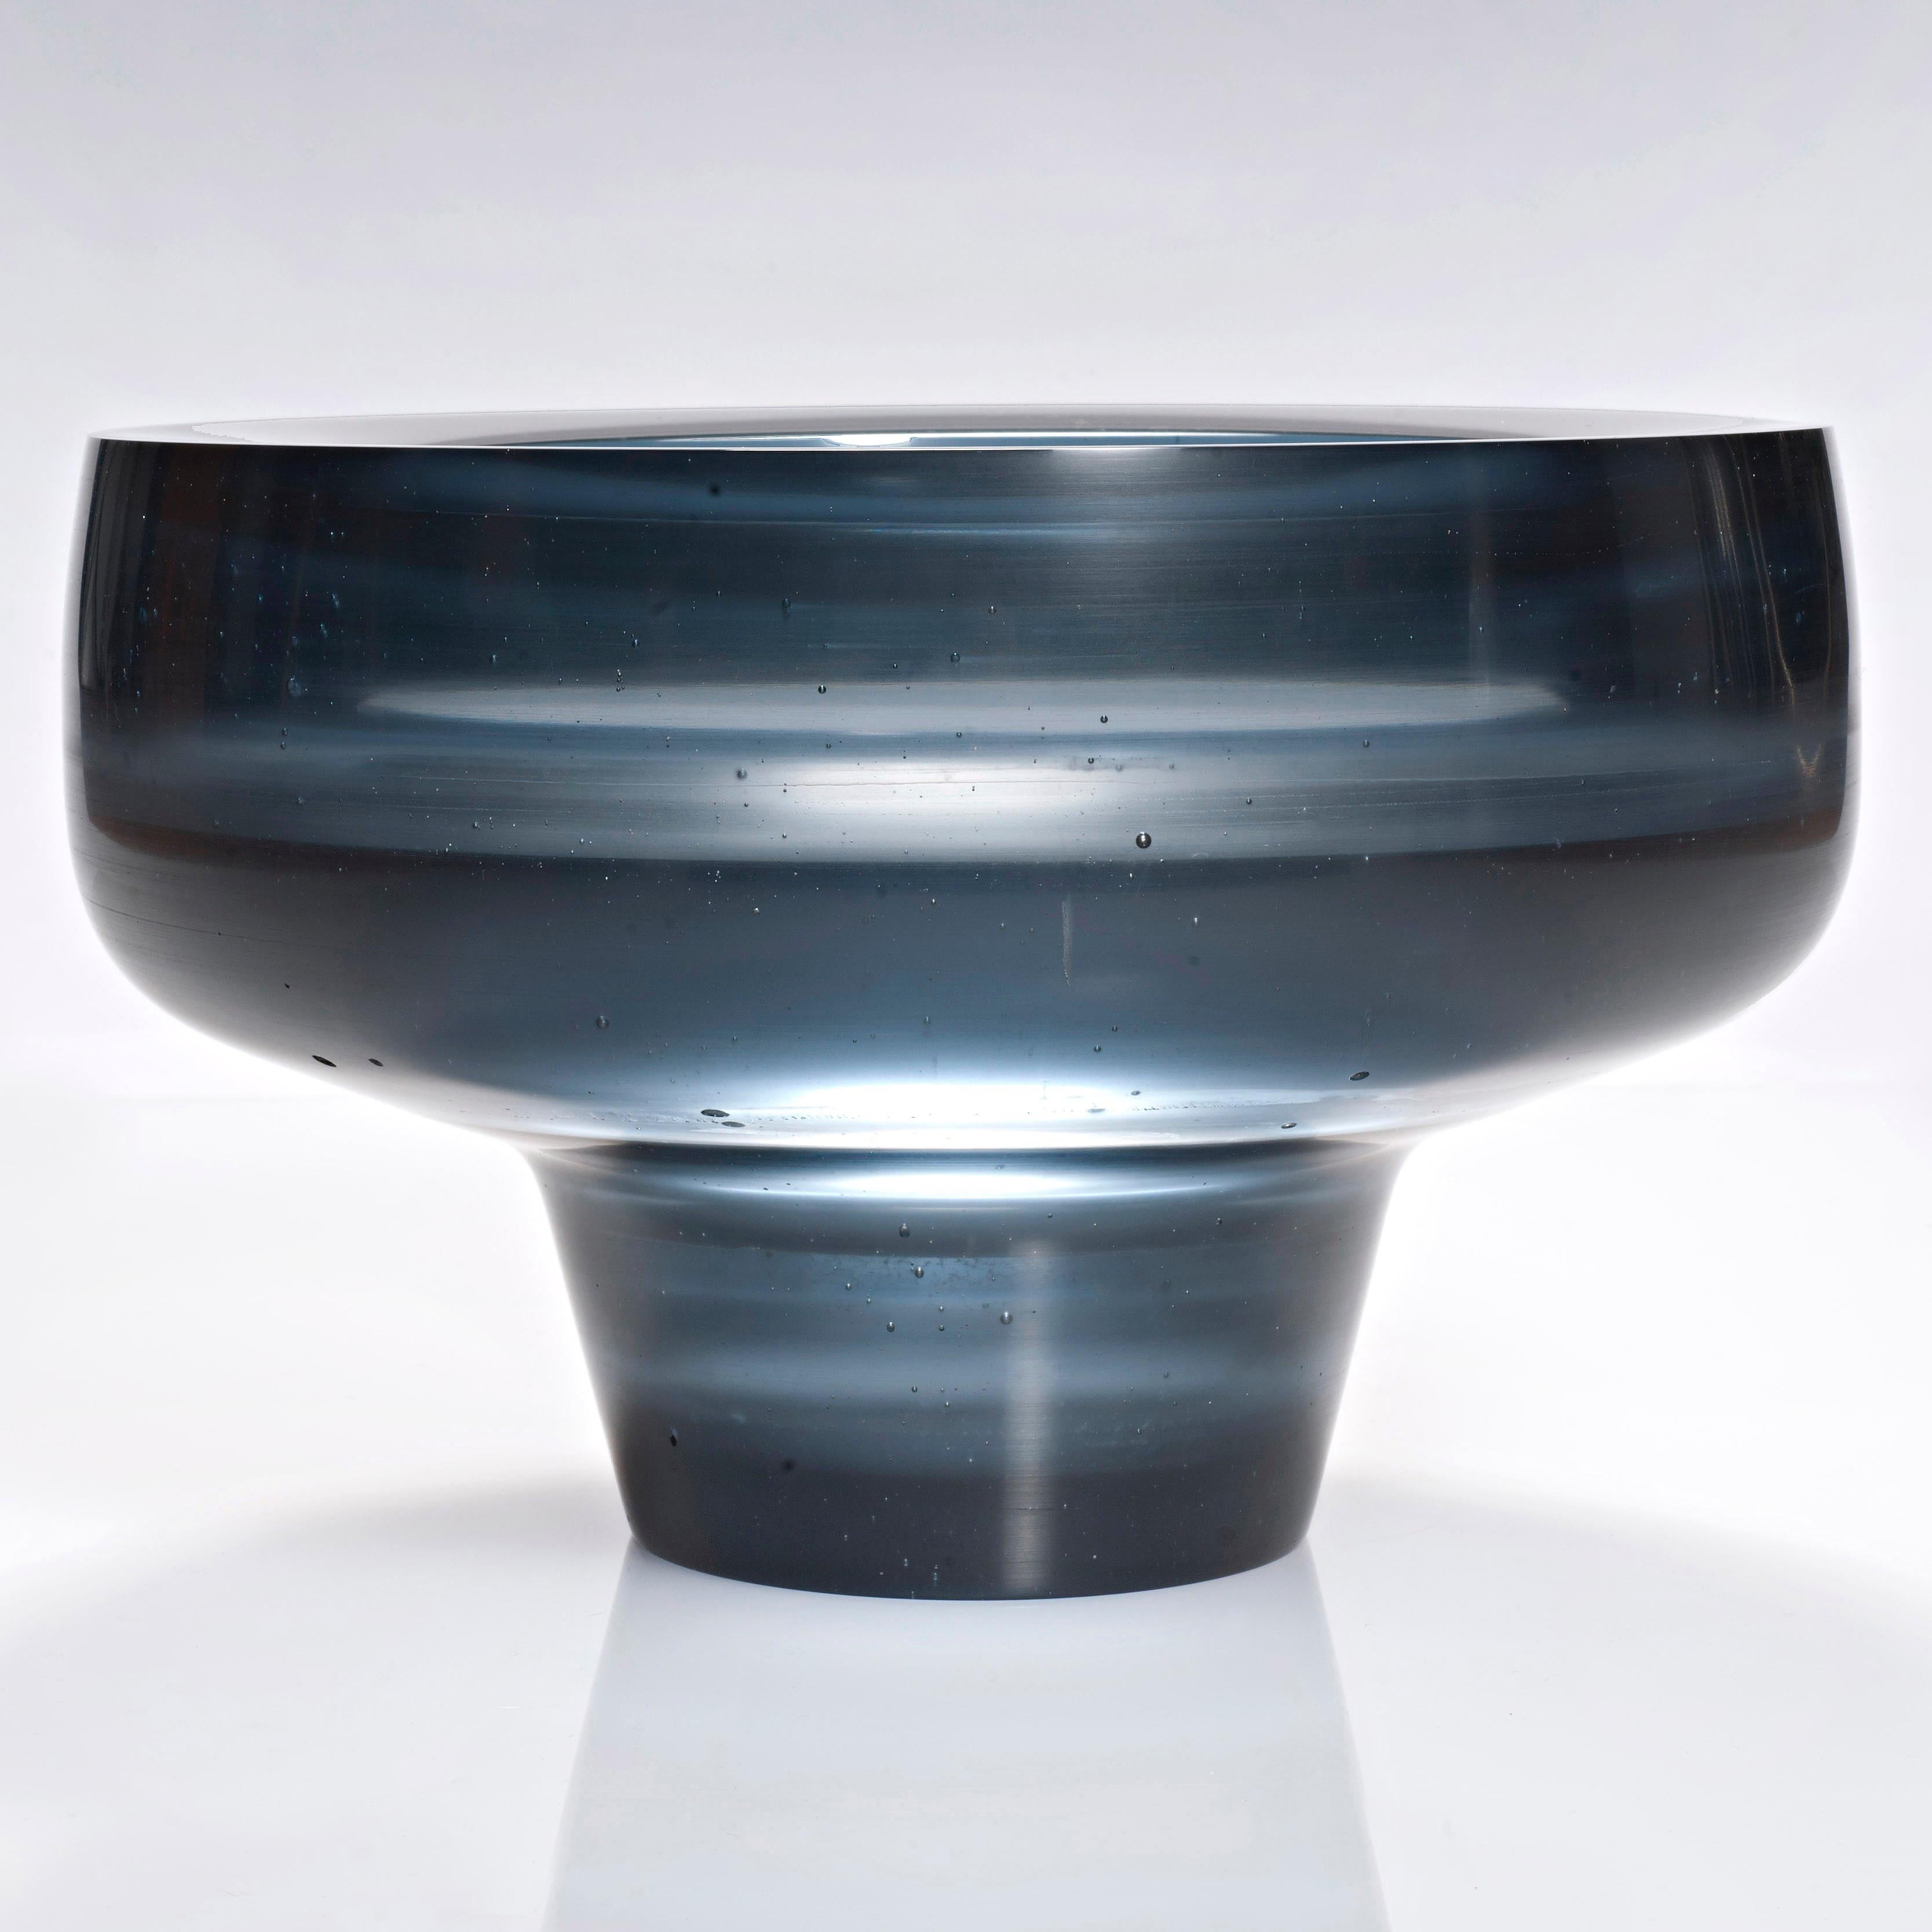 Acanthe is a cast glass artwork in a beautiful steel blue by the British artist Paul Stopler. With a smooth exterior, the interior is stepped into sections with ridged protruding 